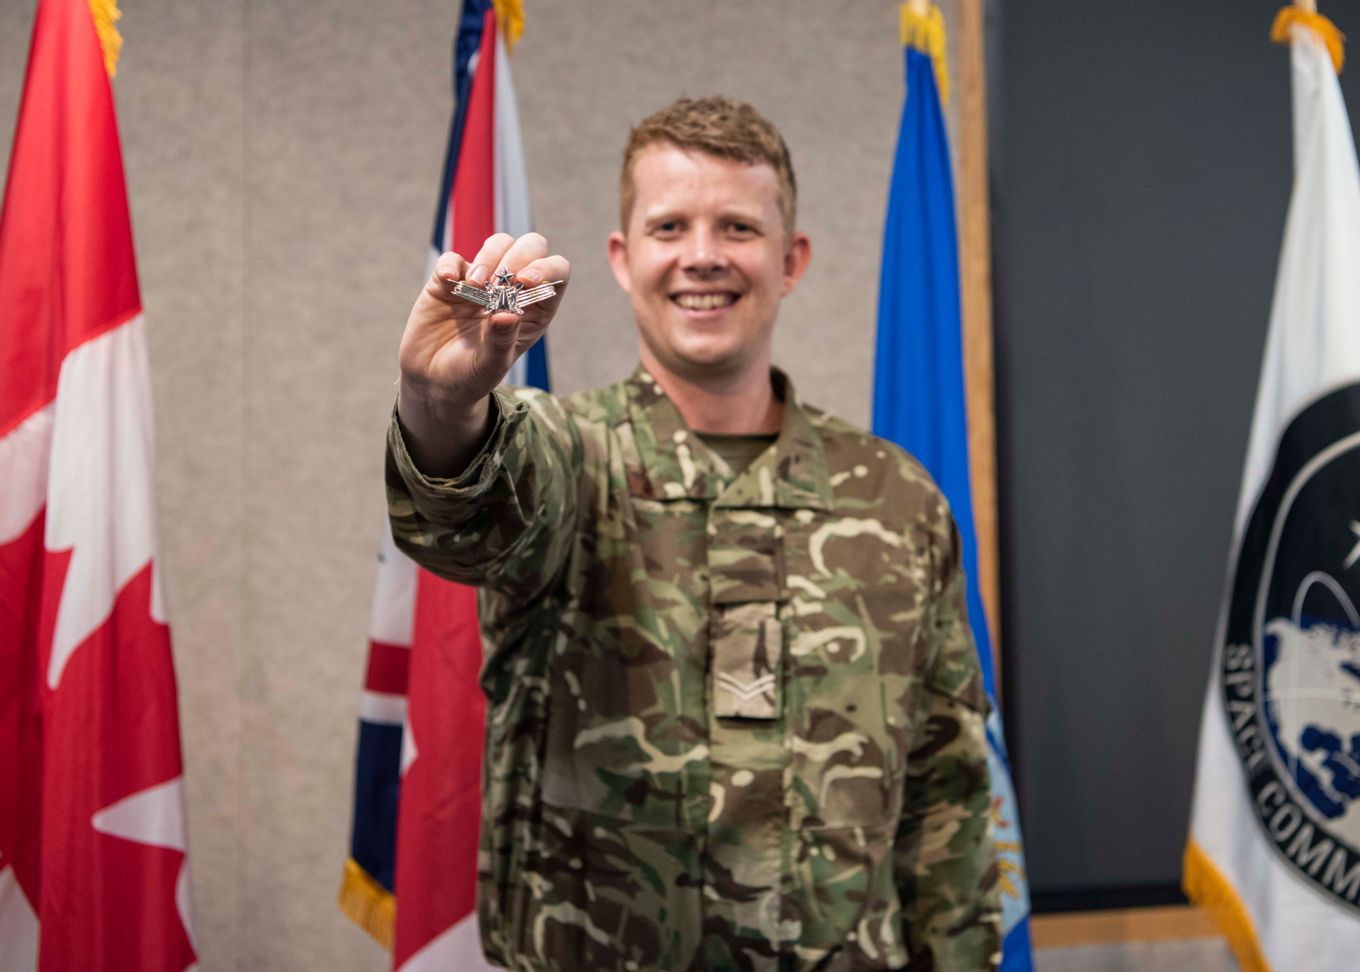 Image shows Corporal Mitchell Astbury holding his new badge